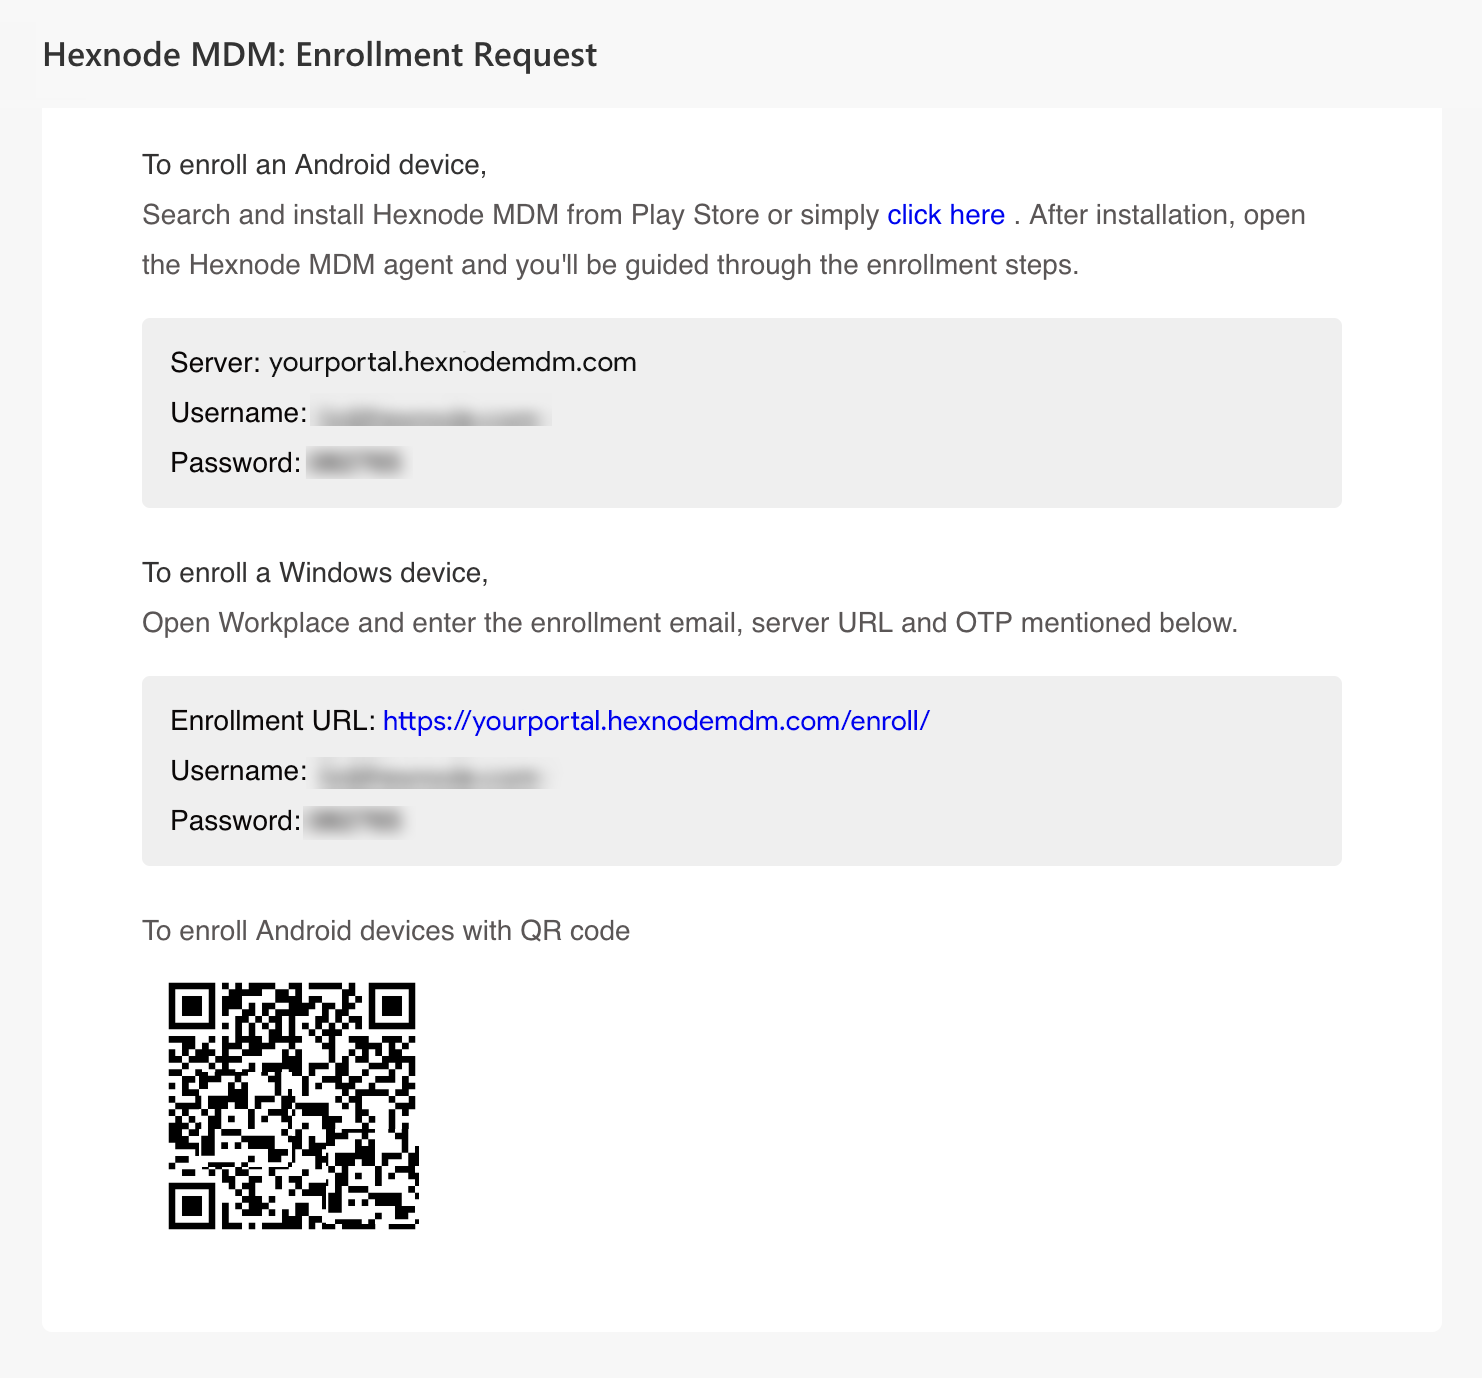 sent email request for authenticated enrollment